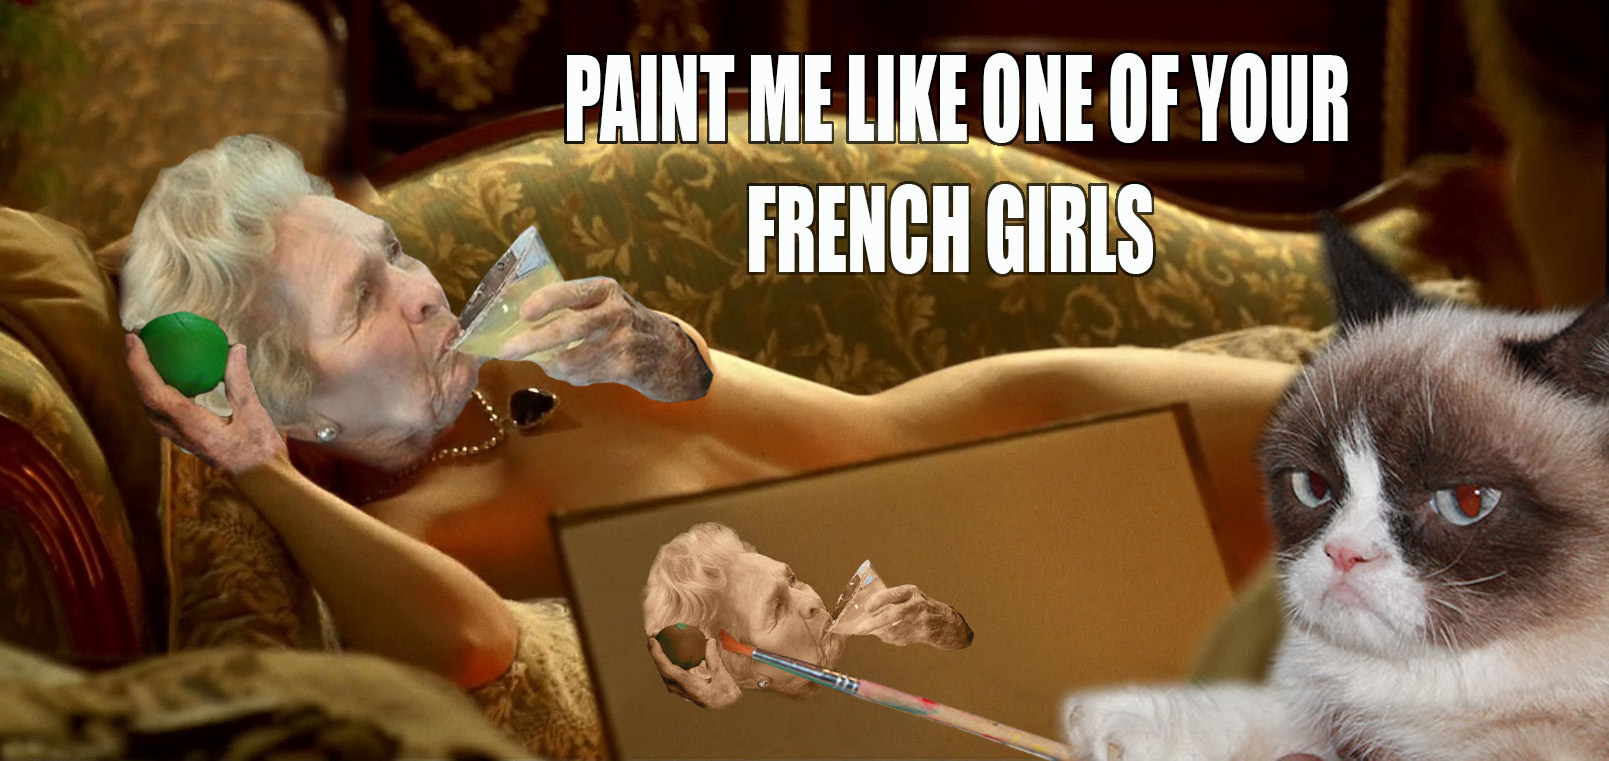 titanic old lady meme - Paint Me One Of Your French Girls French Girls